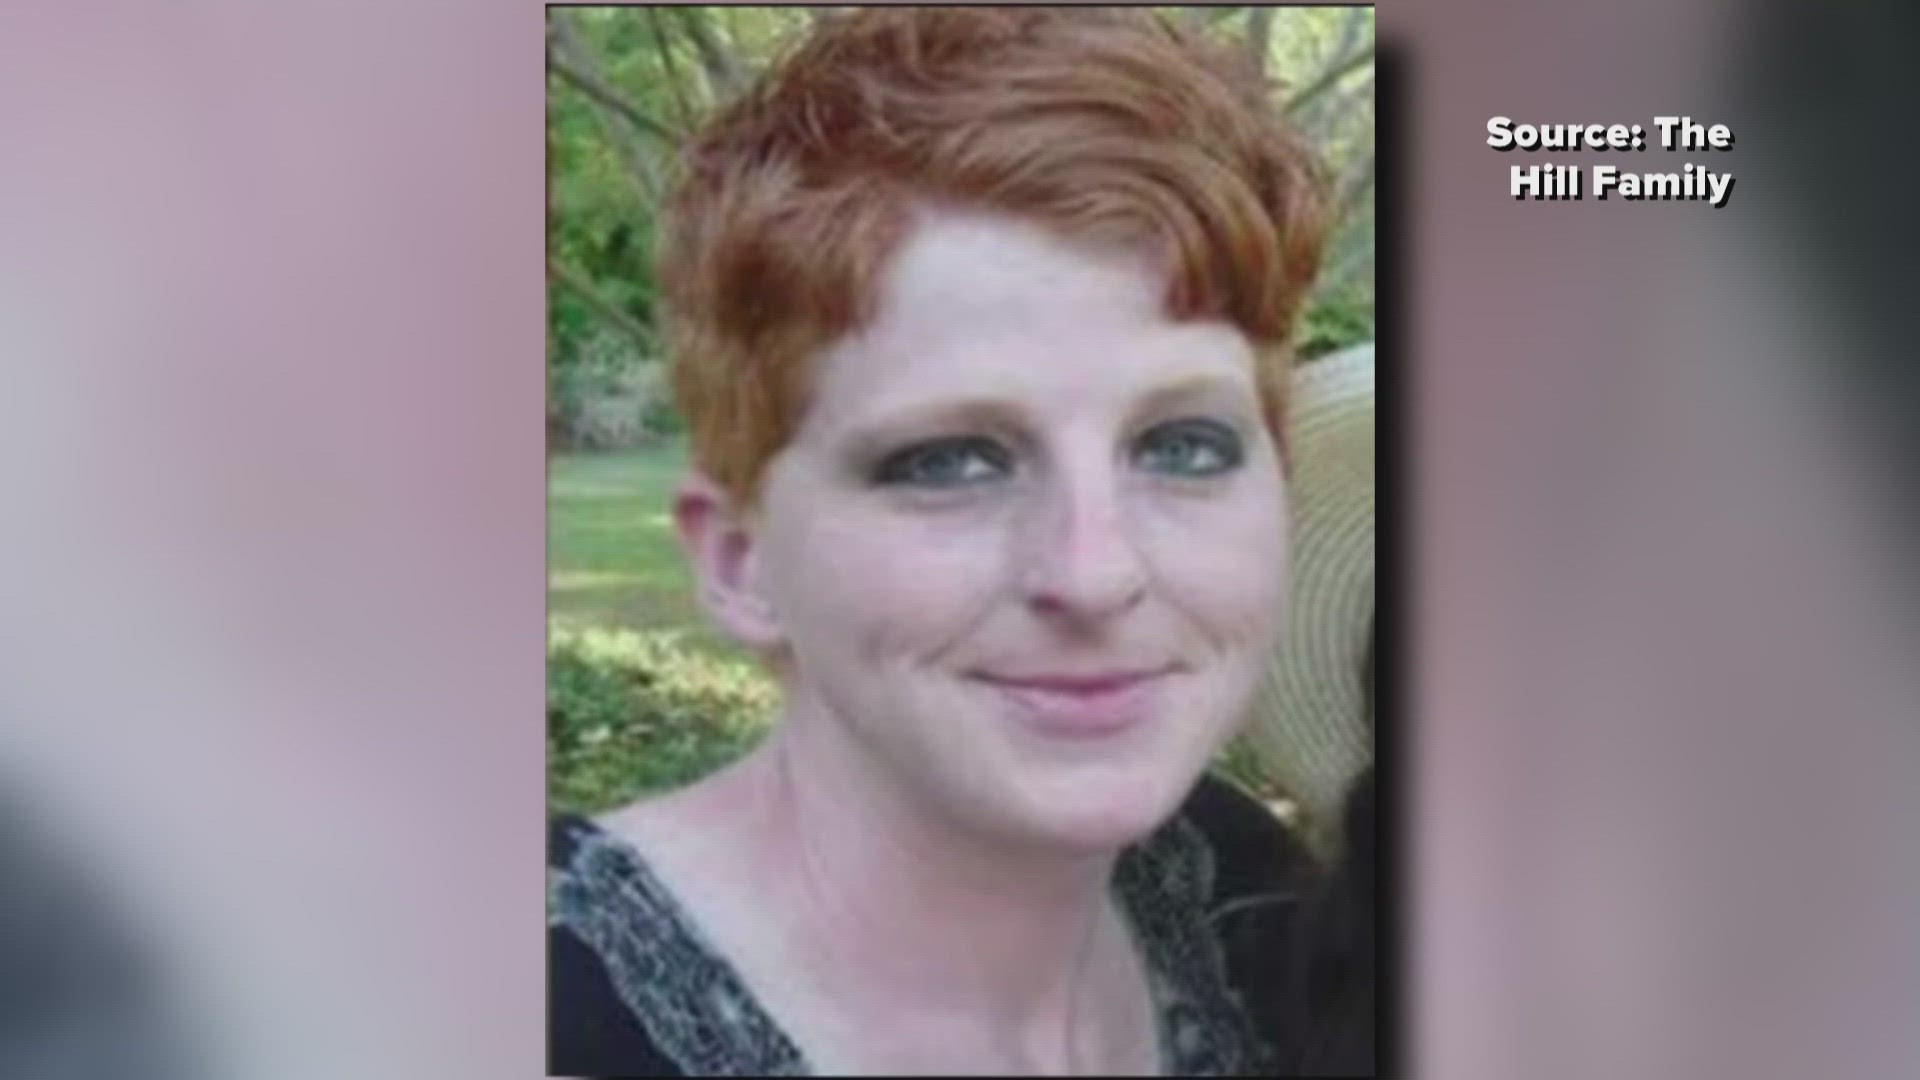 Sarah Hill was reported missing in 2018. Her body was found in a home in 2022. Deputies think they found the person responsible.